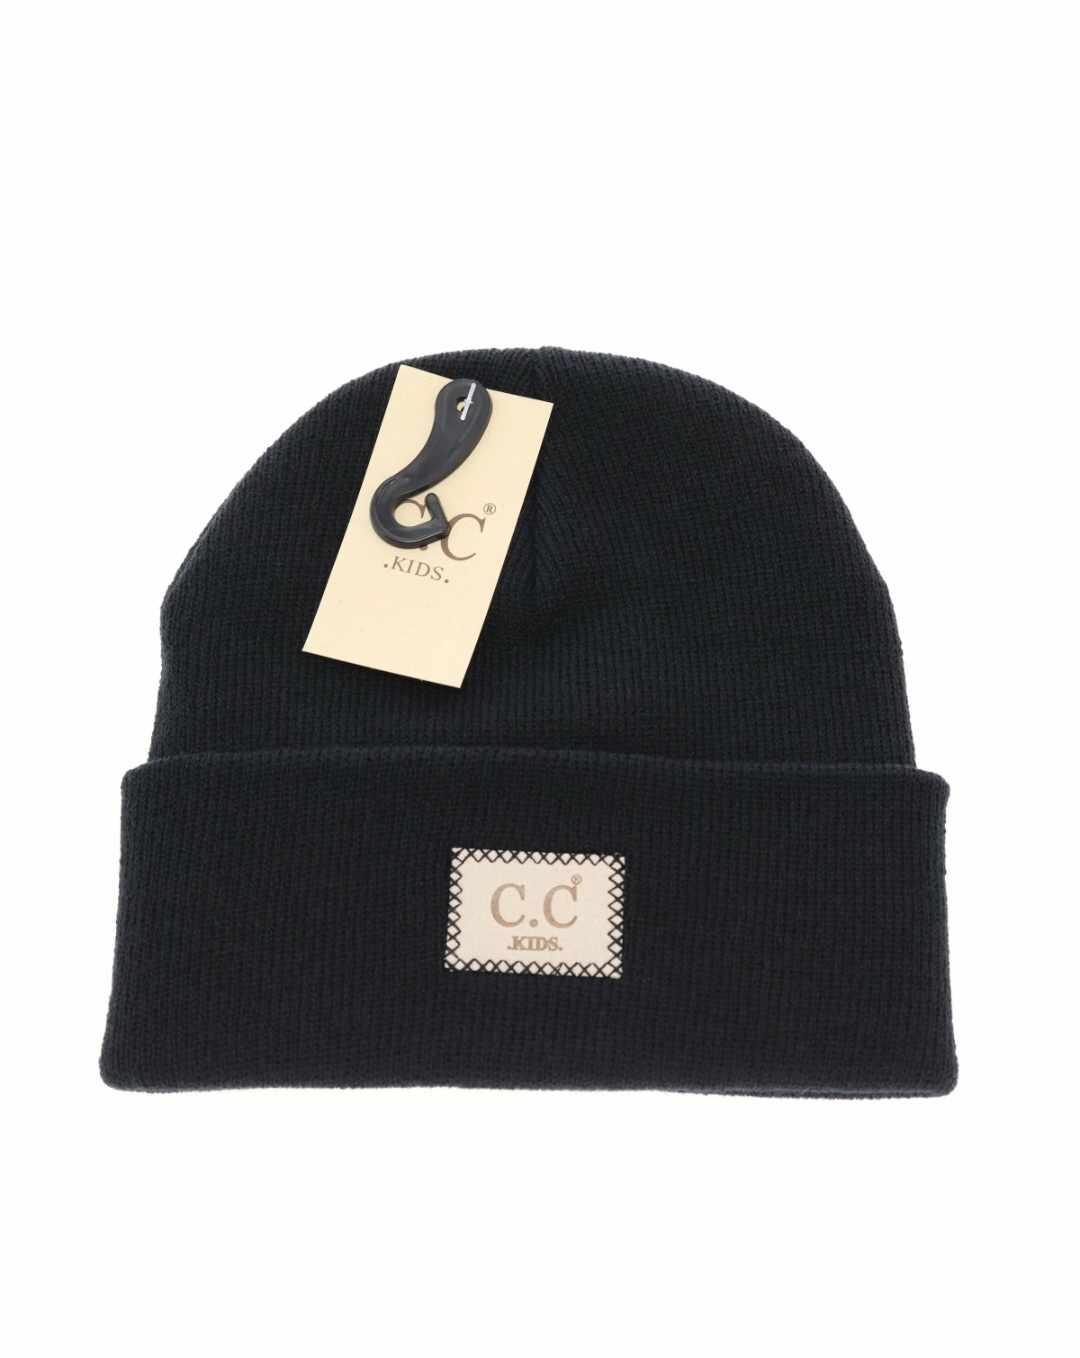 Kids Oversized Beanie Hat  A Touch of Magnolia Boutique Black  